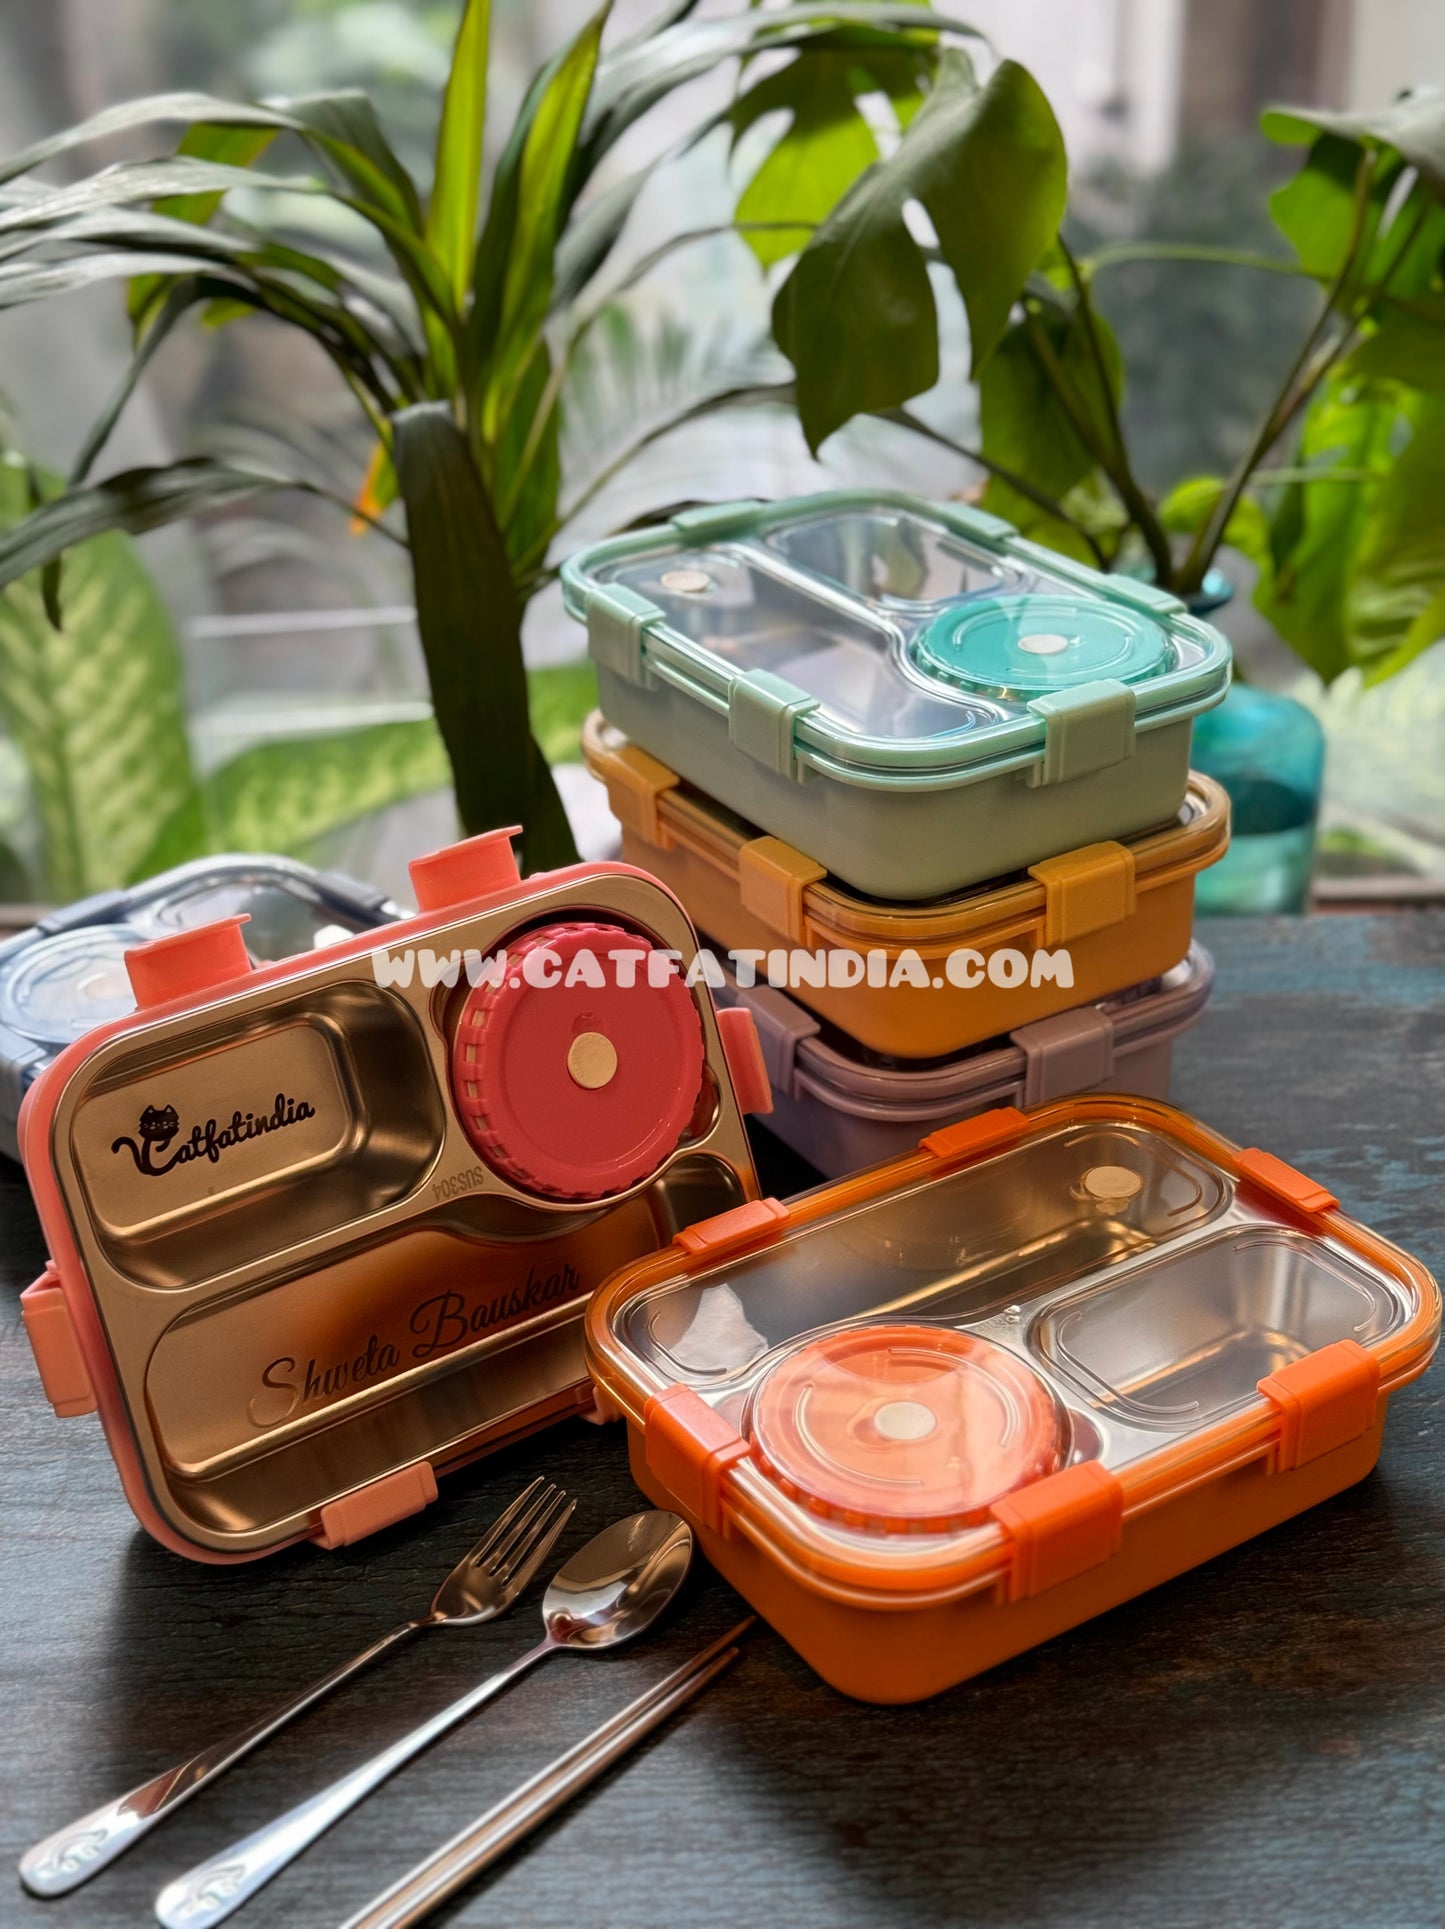 Balanced Meal Bento (With Free Cutlery)